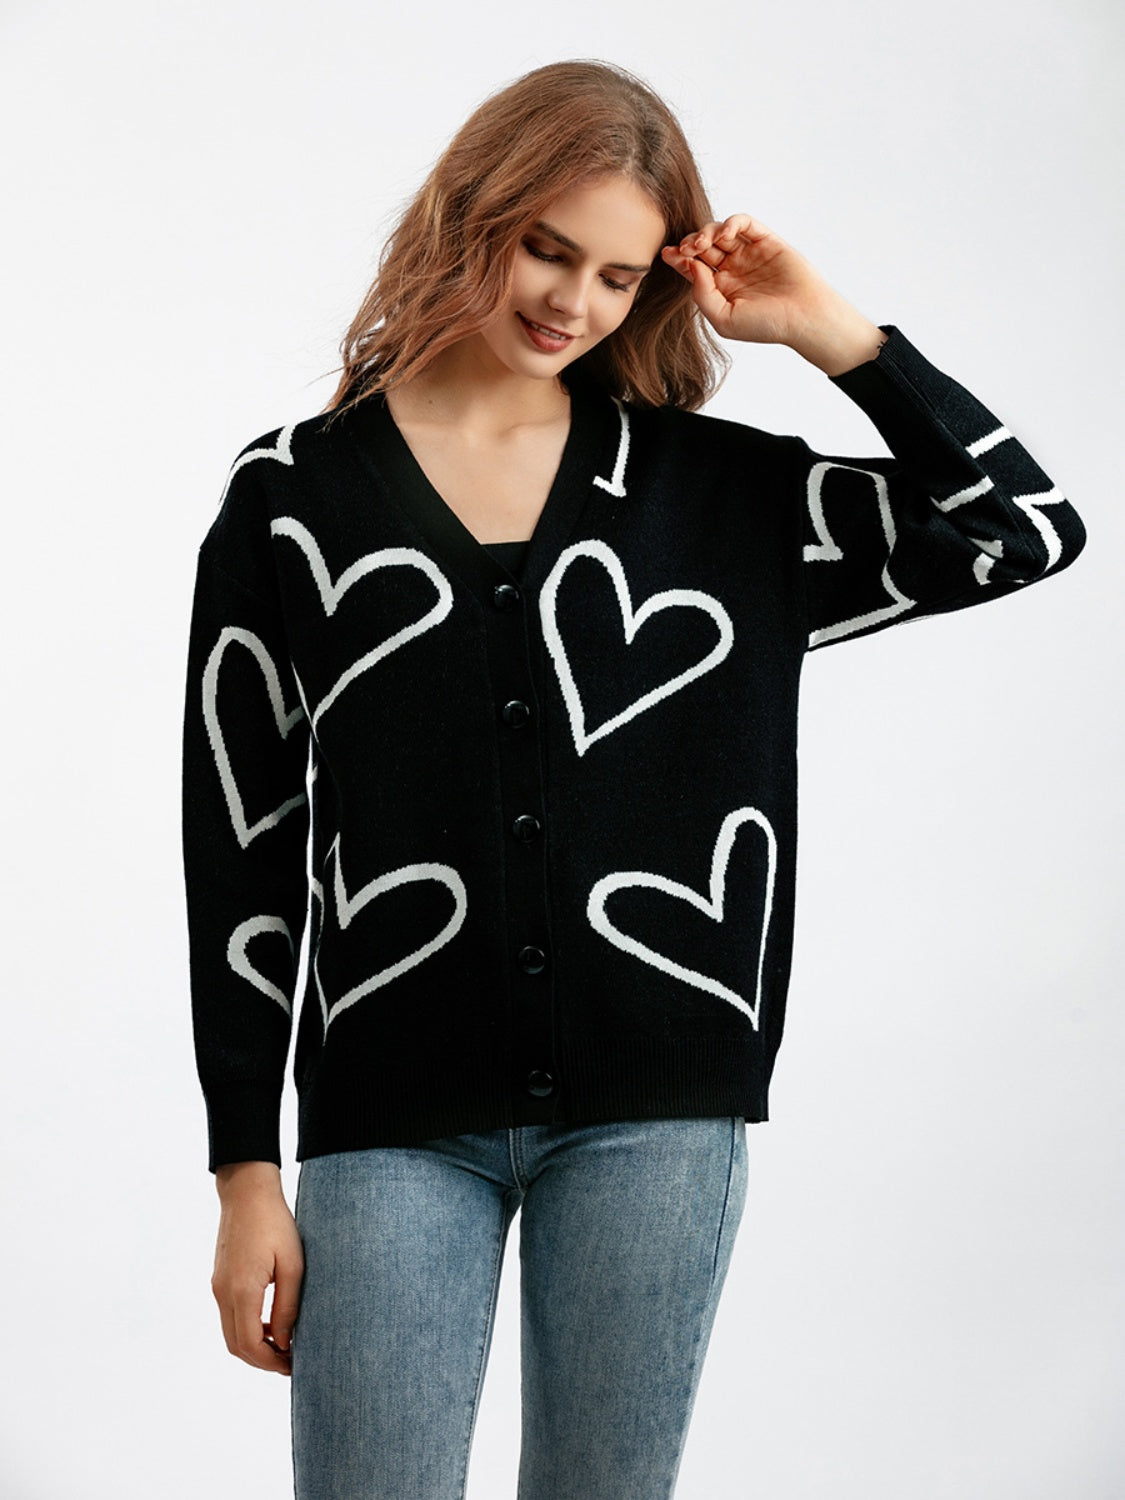 Heart Button Down Cardigan - Black / One Size - Women’s Clothing & Accessories - Shirts & Tops - 4 - 2024